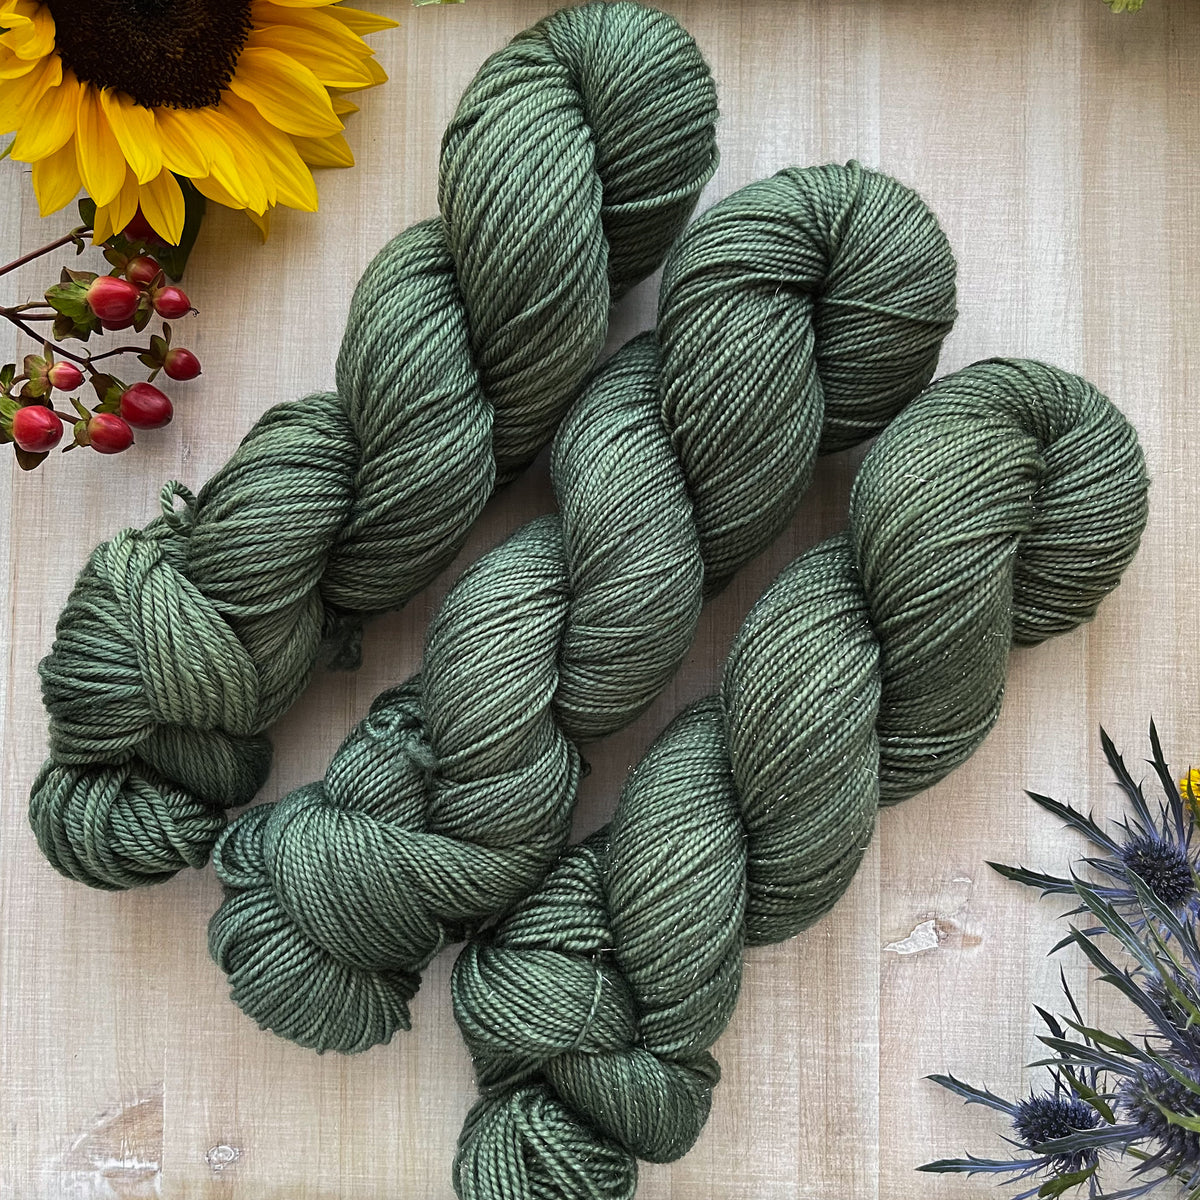 EVERGREENS - Dyed to Order - Hand Dyed Yarn Skein